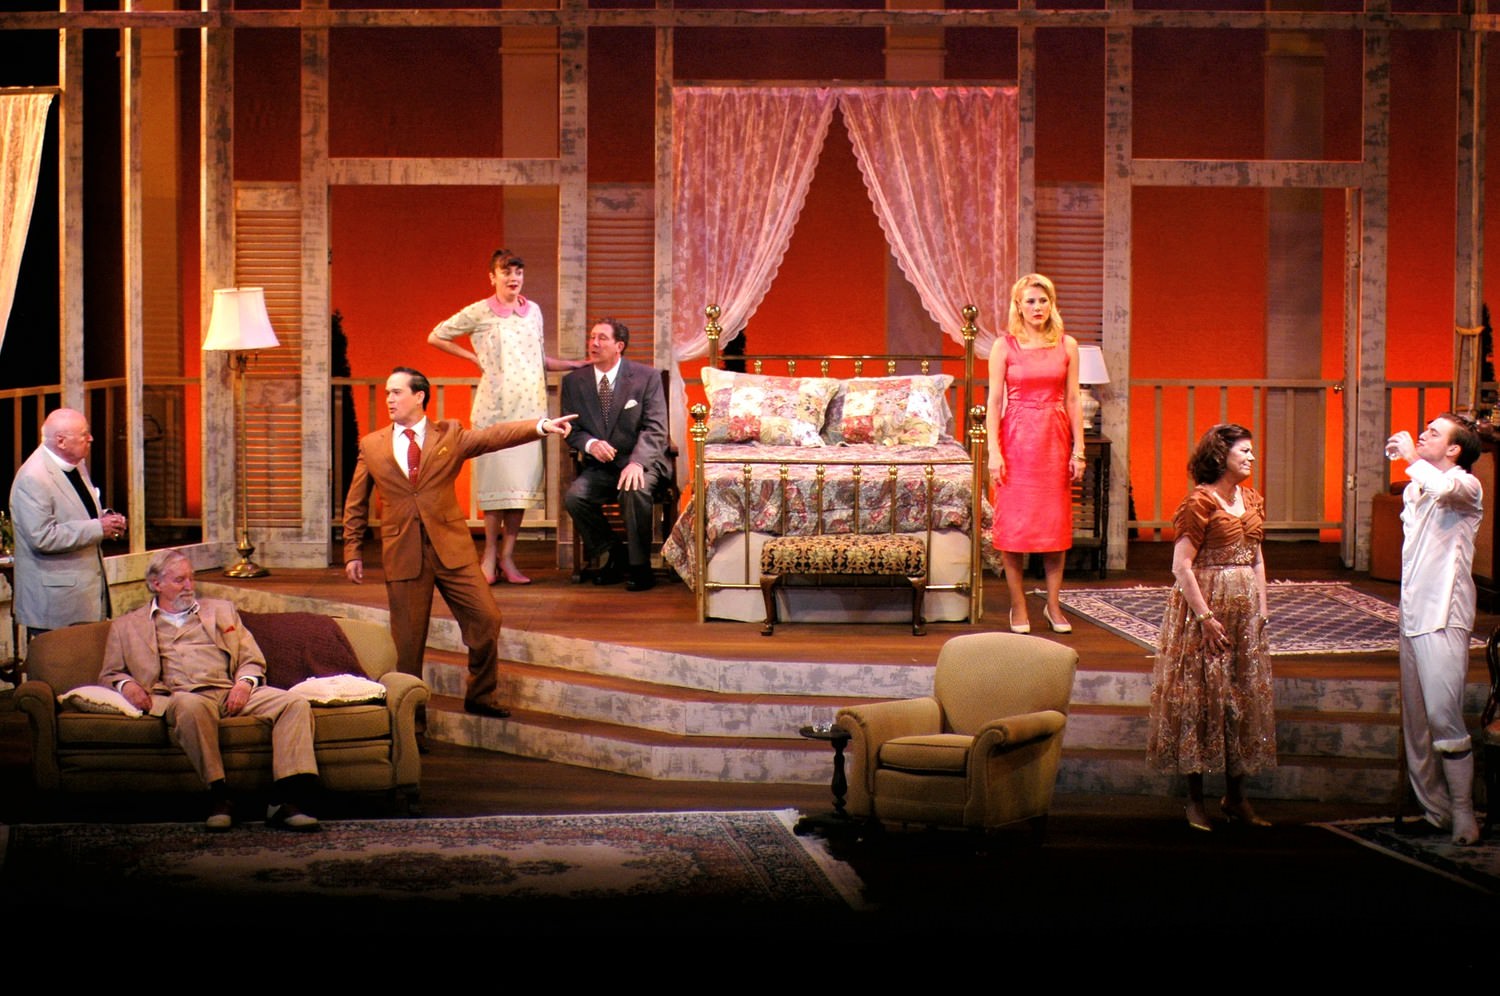  A family confrontation explodes in a scene with (l to r) Bennett Wood, Bill Baker, Kinon Keplinger, Shannon Walton, John Reynolds, Natalie Jones, Martha Jones, and Gabe Beutel-Gunn in the Theatre Memphis Lohrey Stage production of Cat on a Hot TIn Roof, April 28 - May 14, 2017.